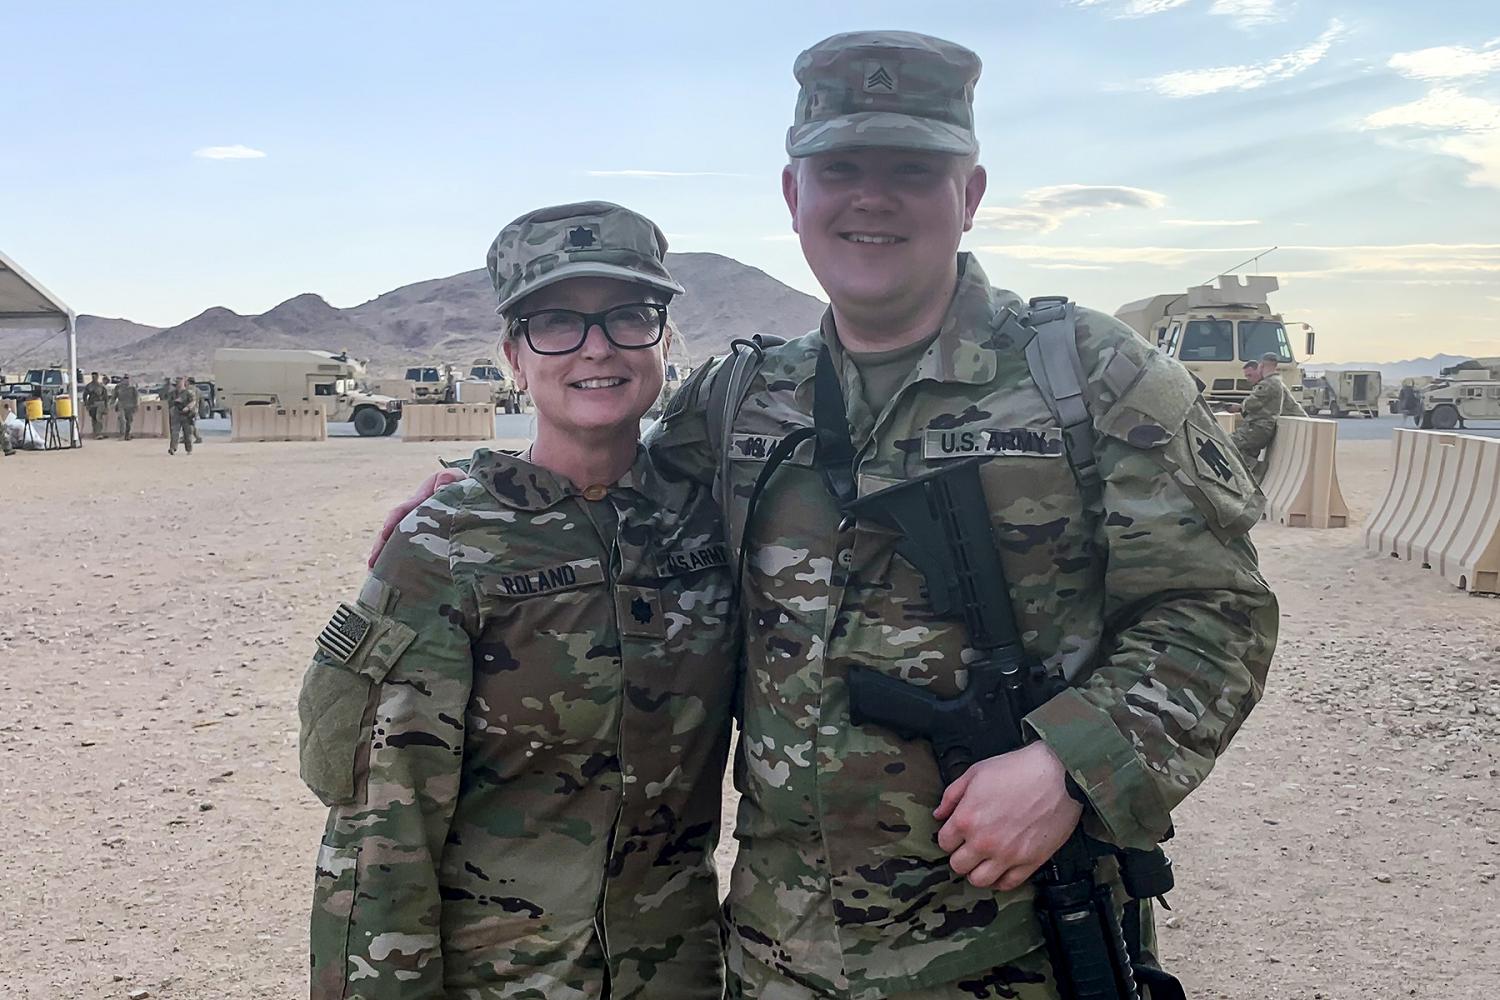 Lt. Col. Tanya Roland and her son, Sgt. Paul Roland, serve together in the 45th IBCT during a rotation at the National Training Center in Fort Irwin, CA, July 11, 2021. Tanya Roland, the 45th IBCT judge advocate, transferred to the Oklahoma Army National Guard in November 2020 after nearly 18 years of service with the United States Army Reserve. Paul Roland, religious affairs specialist for Headquarters Battery, 1st Battalion, 160th Field Artillery Regiment, has been in the Oklahoma Army National Guard for seven years. (Oklahoma Army National Guard photo by Maj. Lee Sargent)